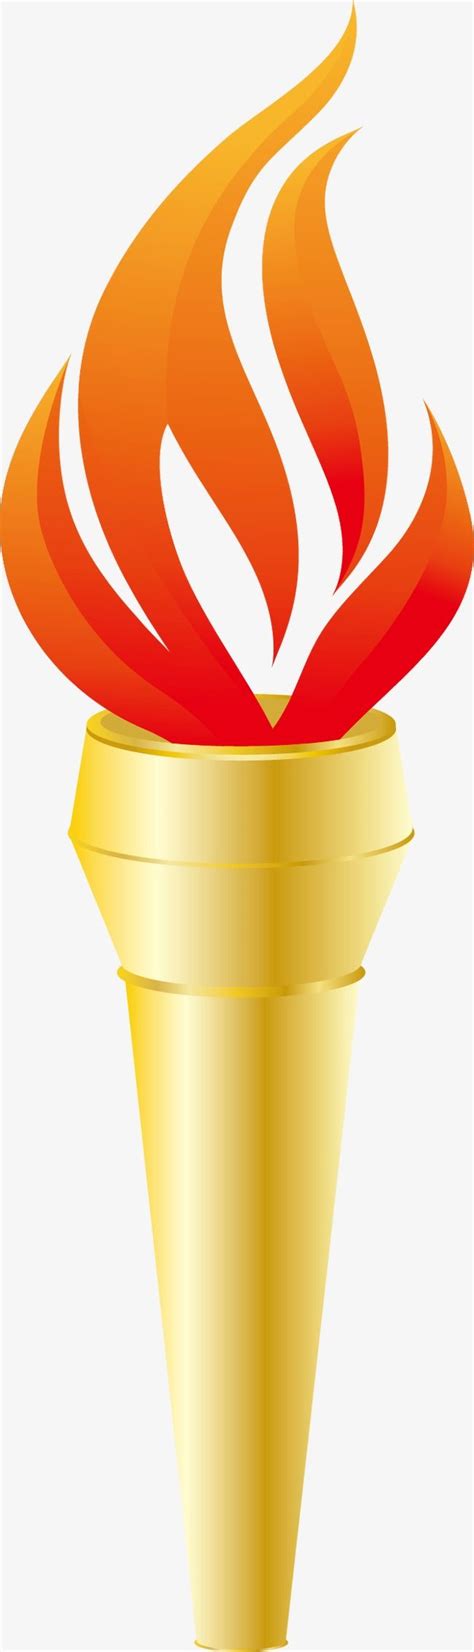 Olympic Torch Silhouette PNG Free, Burning Torch Vector Silhouettes, Olympic Torch, Torch ...